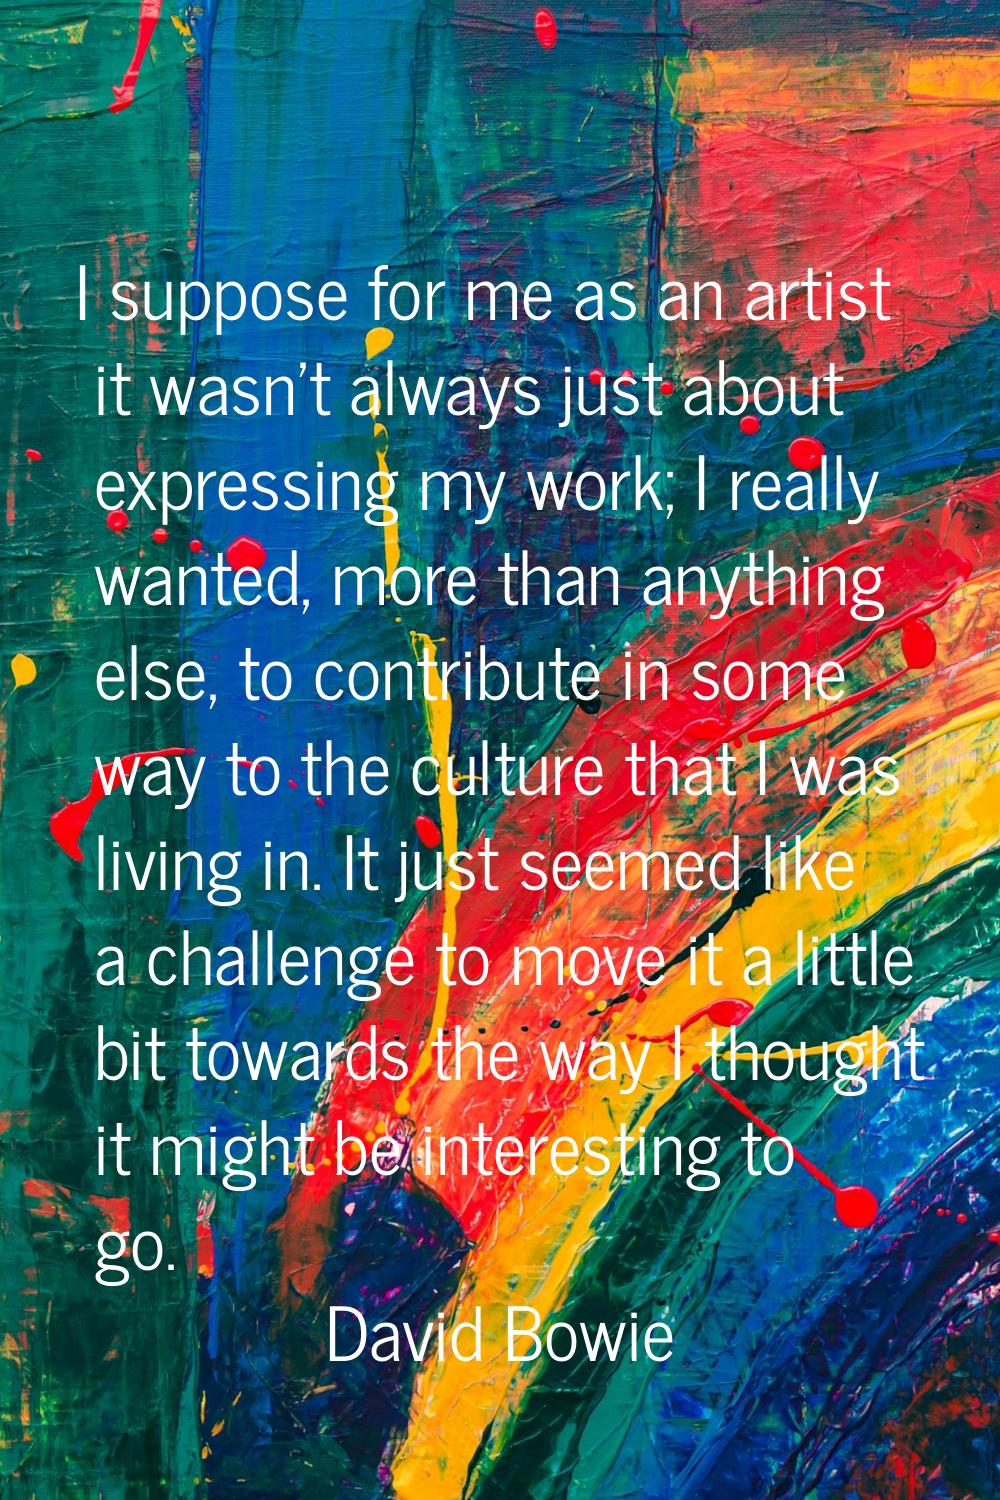 I suppose for me as an artist it wasn't always just about expressing my work; I really wanted, more